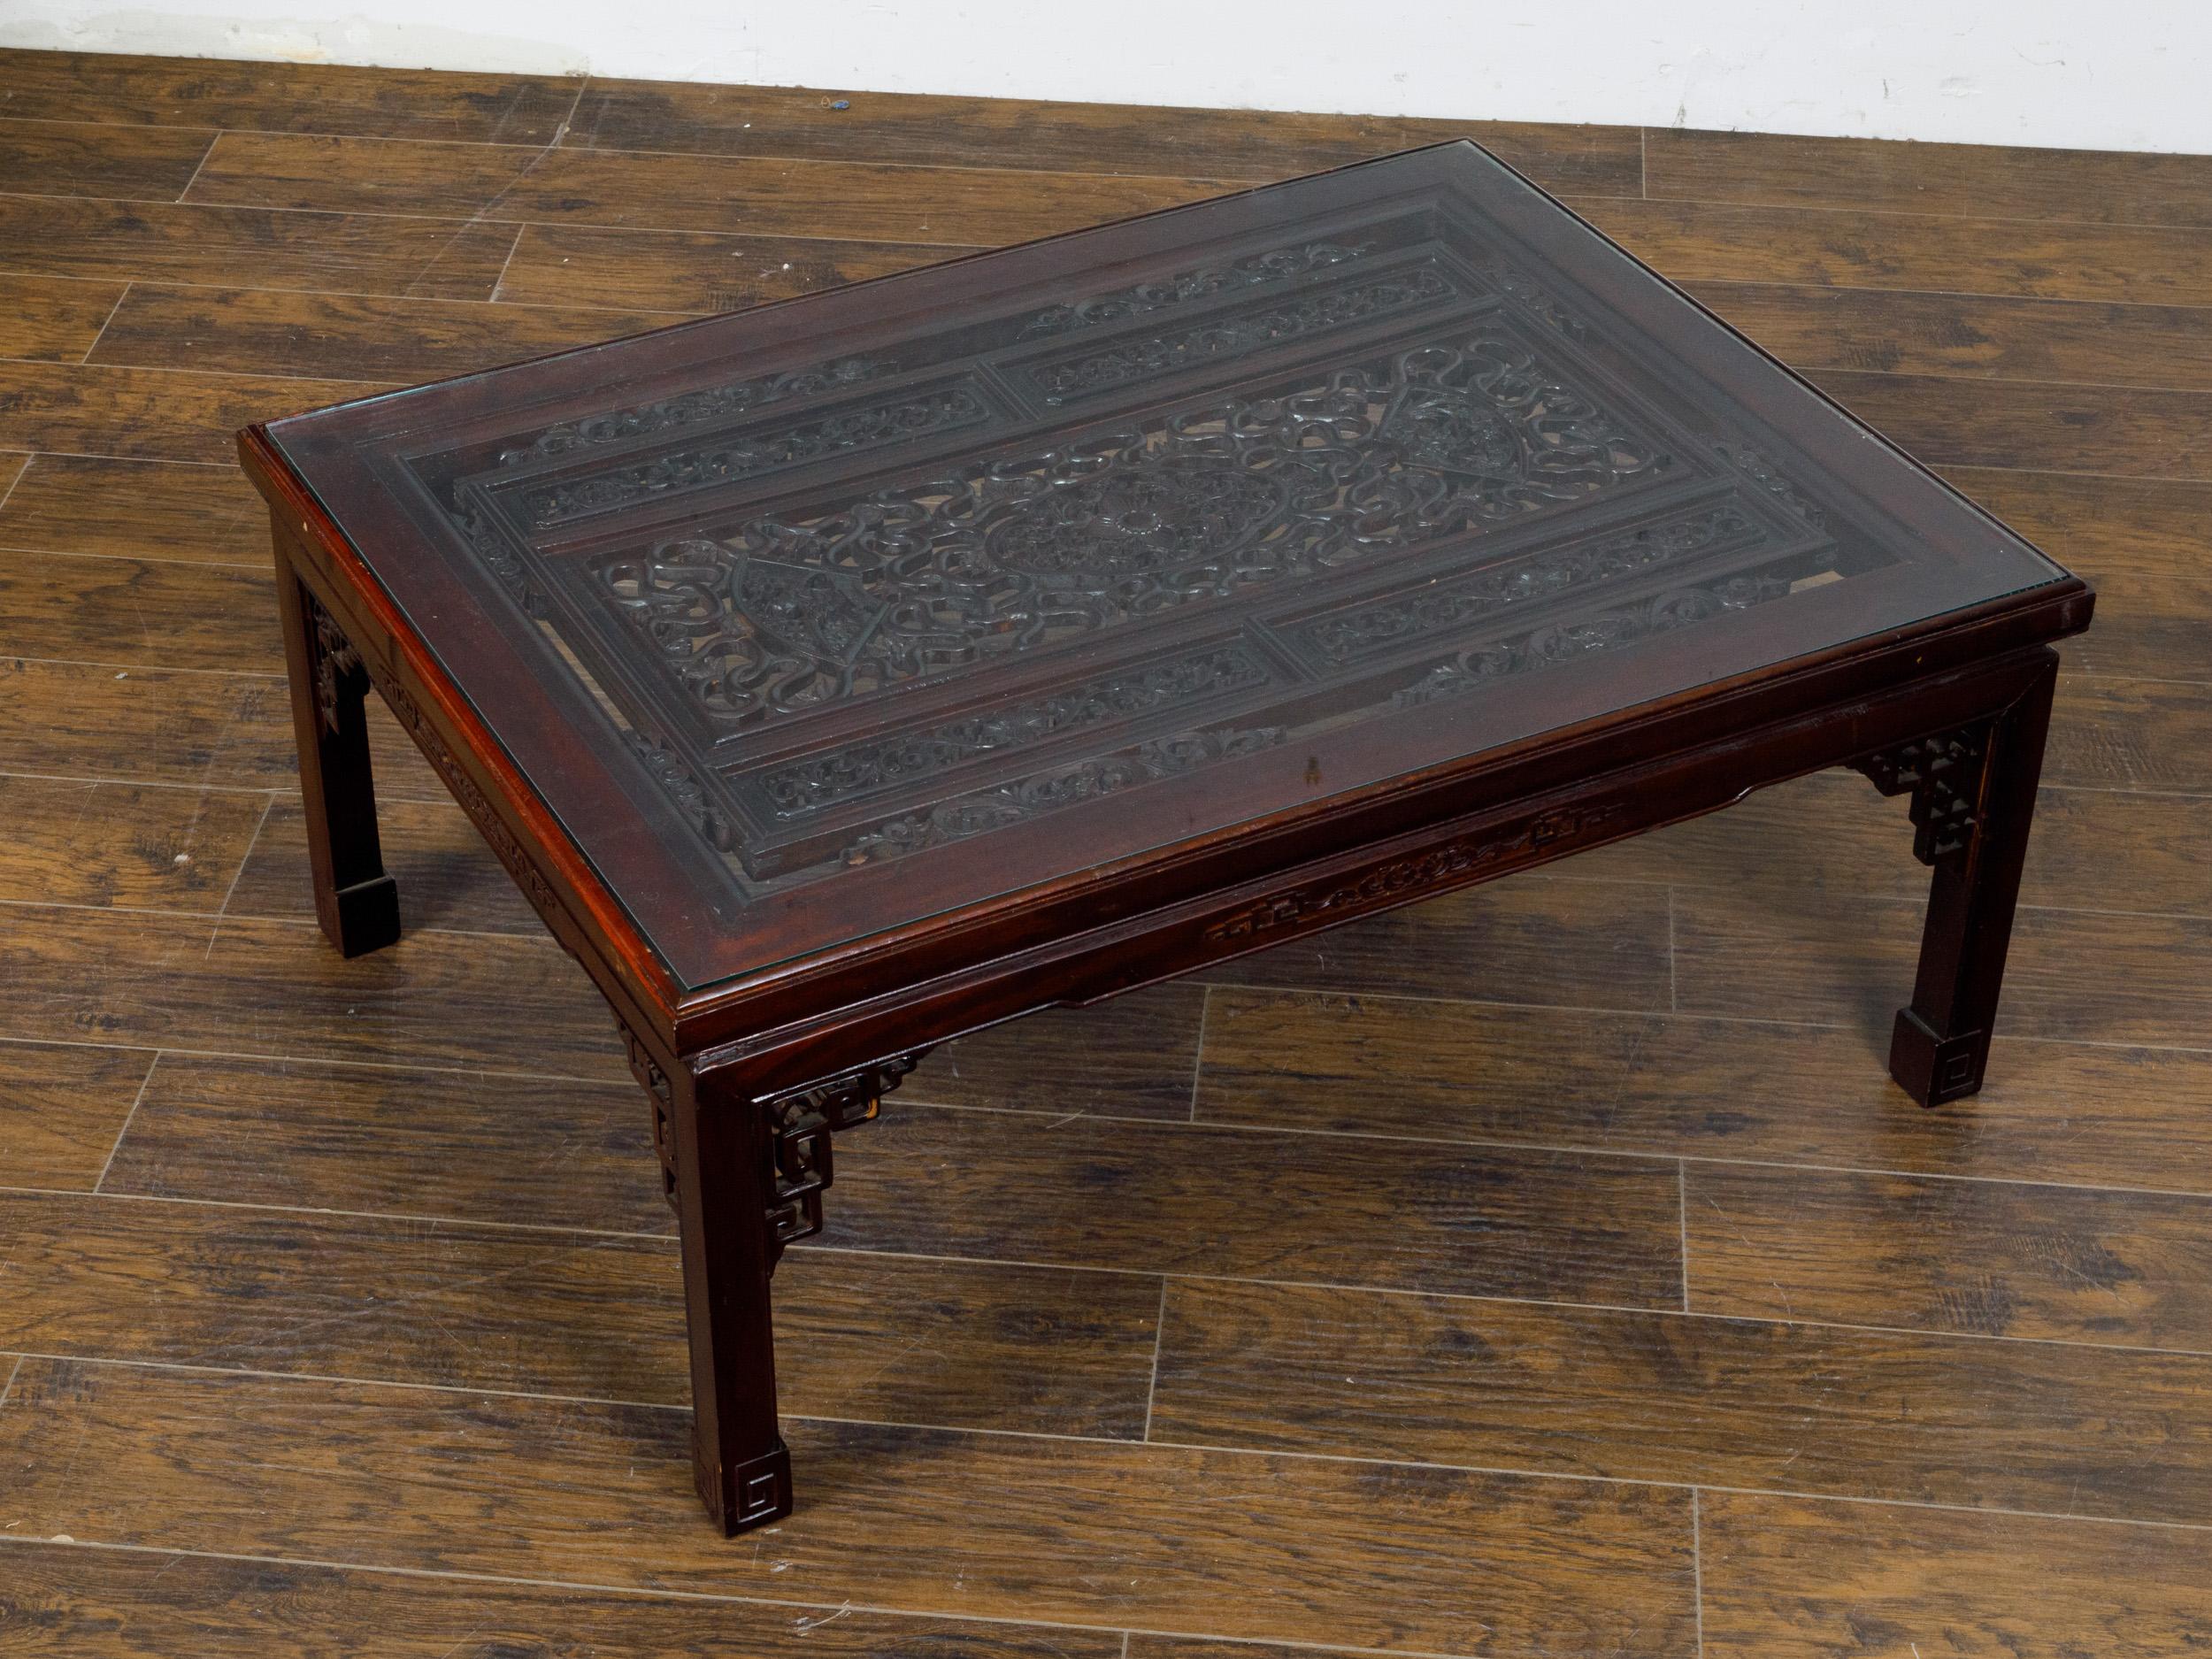 An Asian coffee table with carved fretwork top under glass and linear scrolling feet, circa 1950. This table's most captivating feature is the intricate fretwork that adorns the top, protected under a layer of clear glass, allowing one to admire the